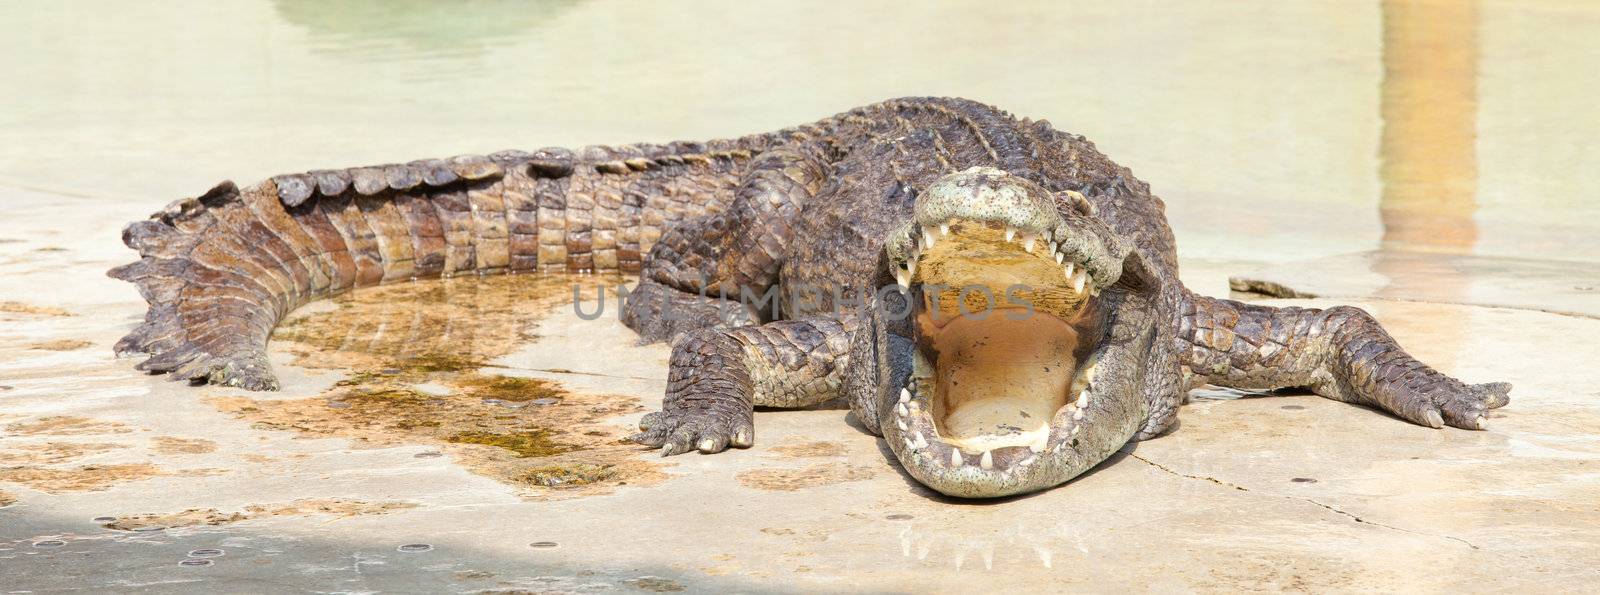 crocodile with open mouth resting in water